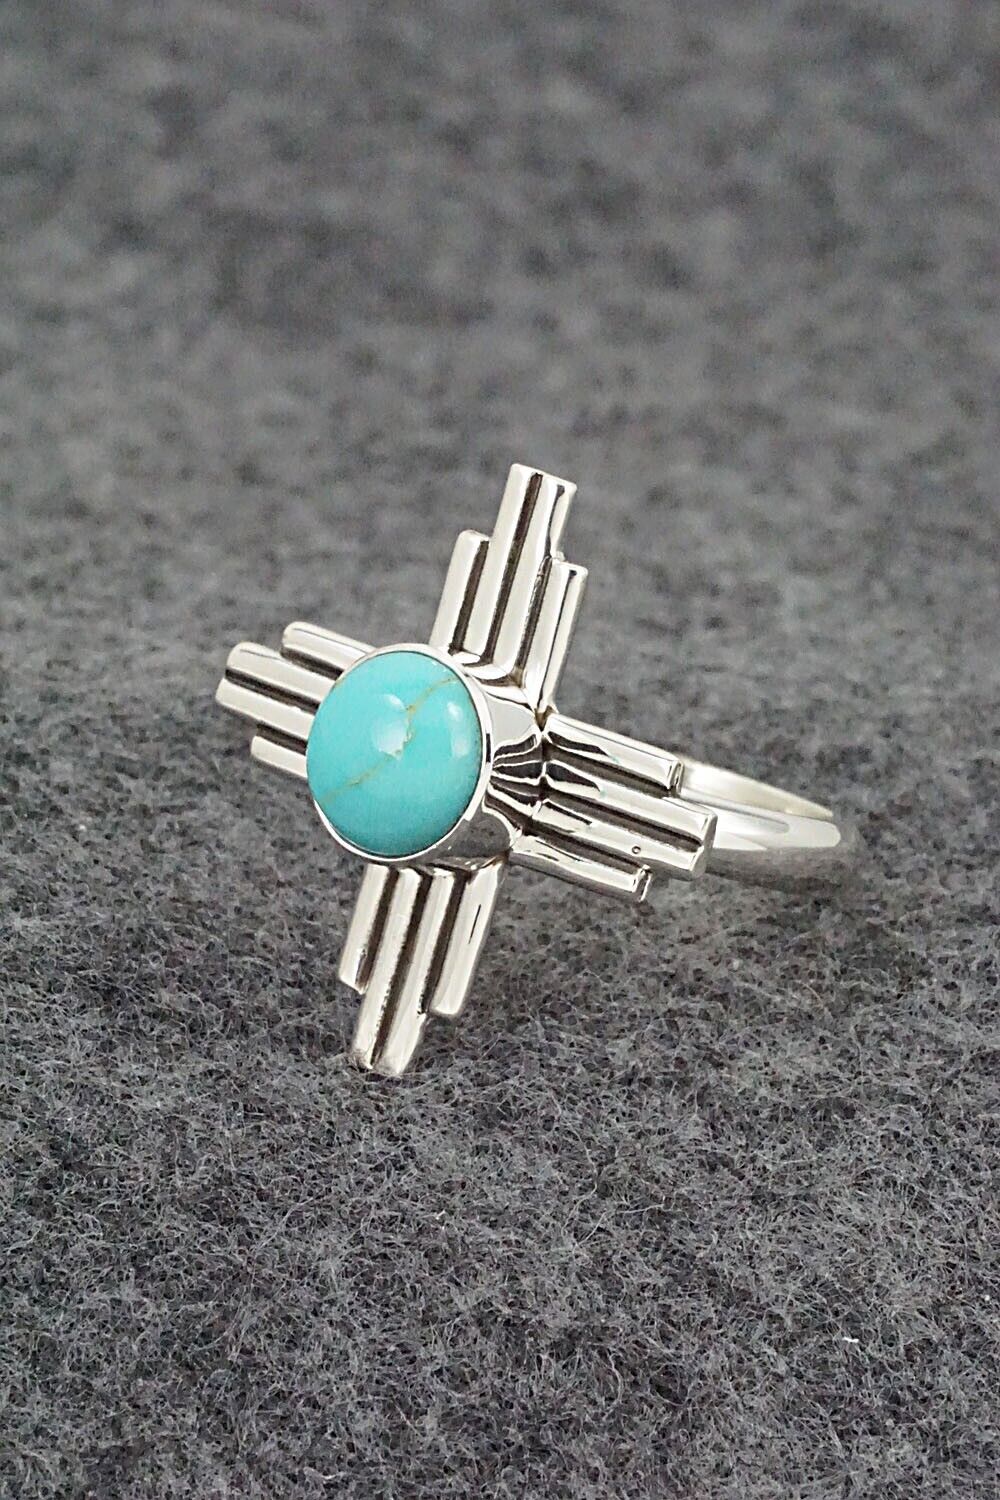 Turquoise and Sterling Silver Ring - Raymond Coriz - Size 7